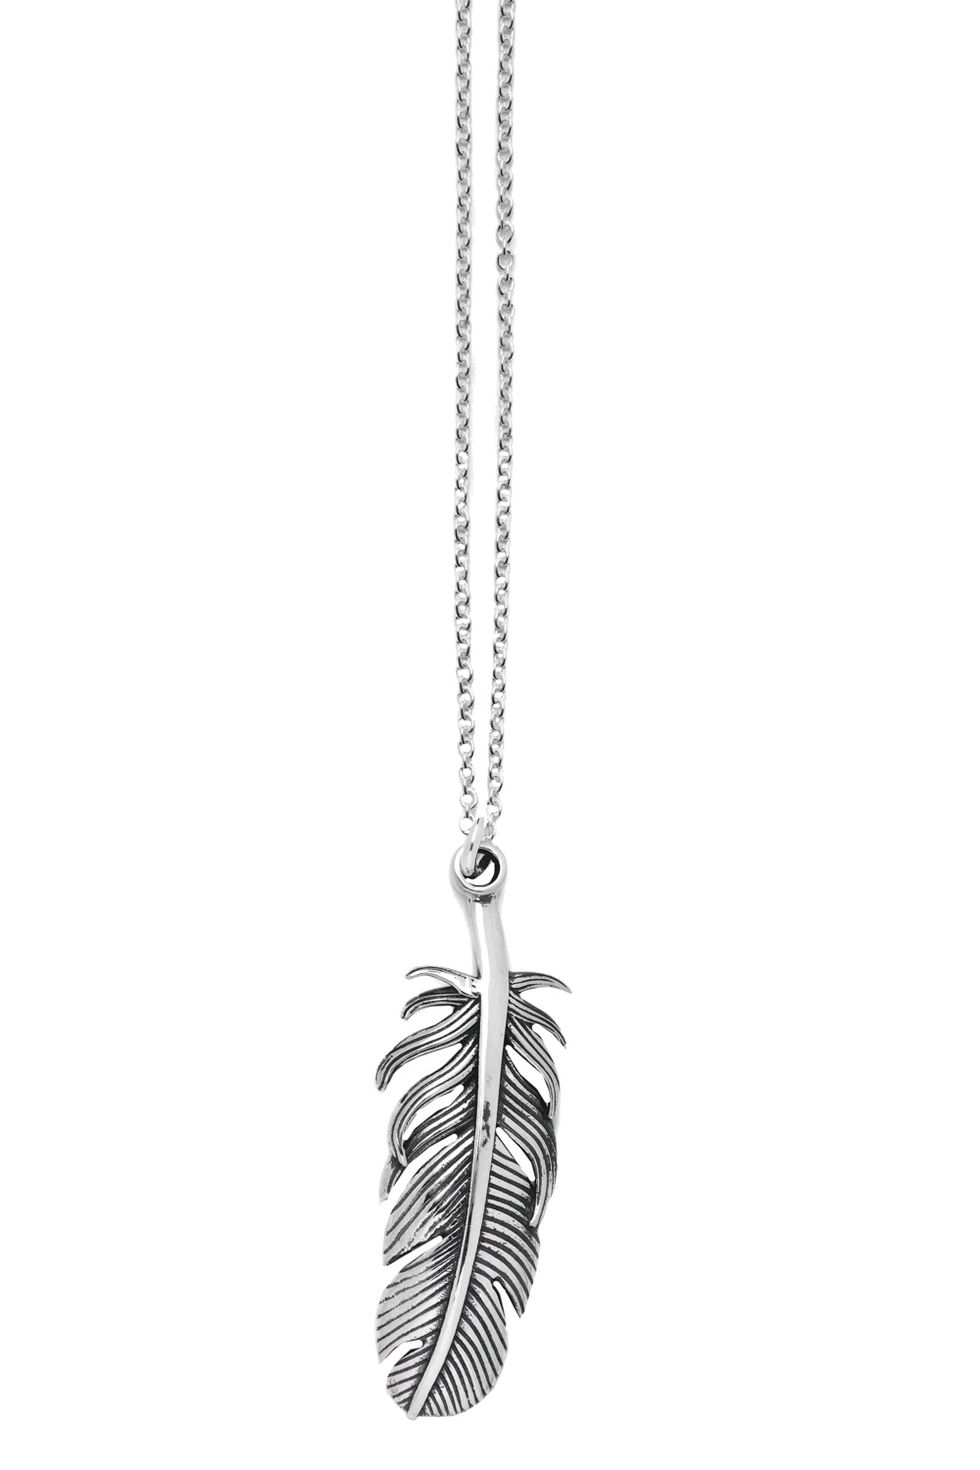 Pendant, Body jewelry, Jewellery, Necklace, Fashion accessory, Chain, Leaf, Locket, Feather, Silver, 